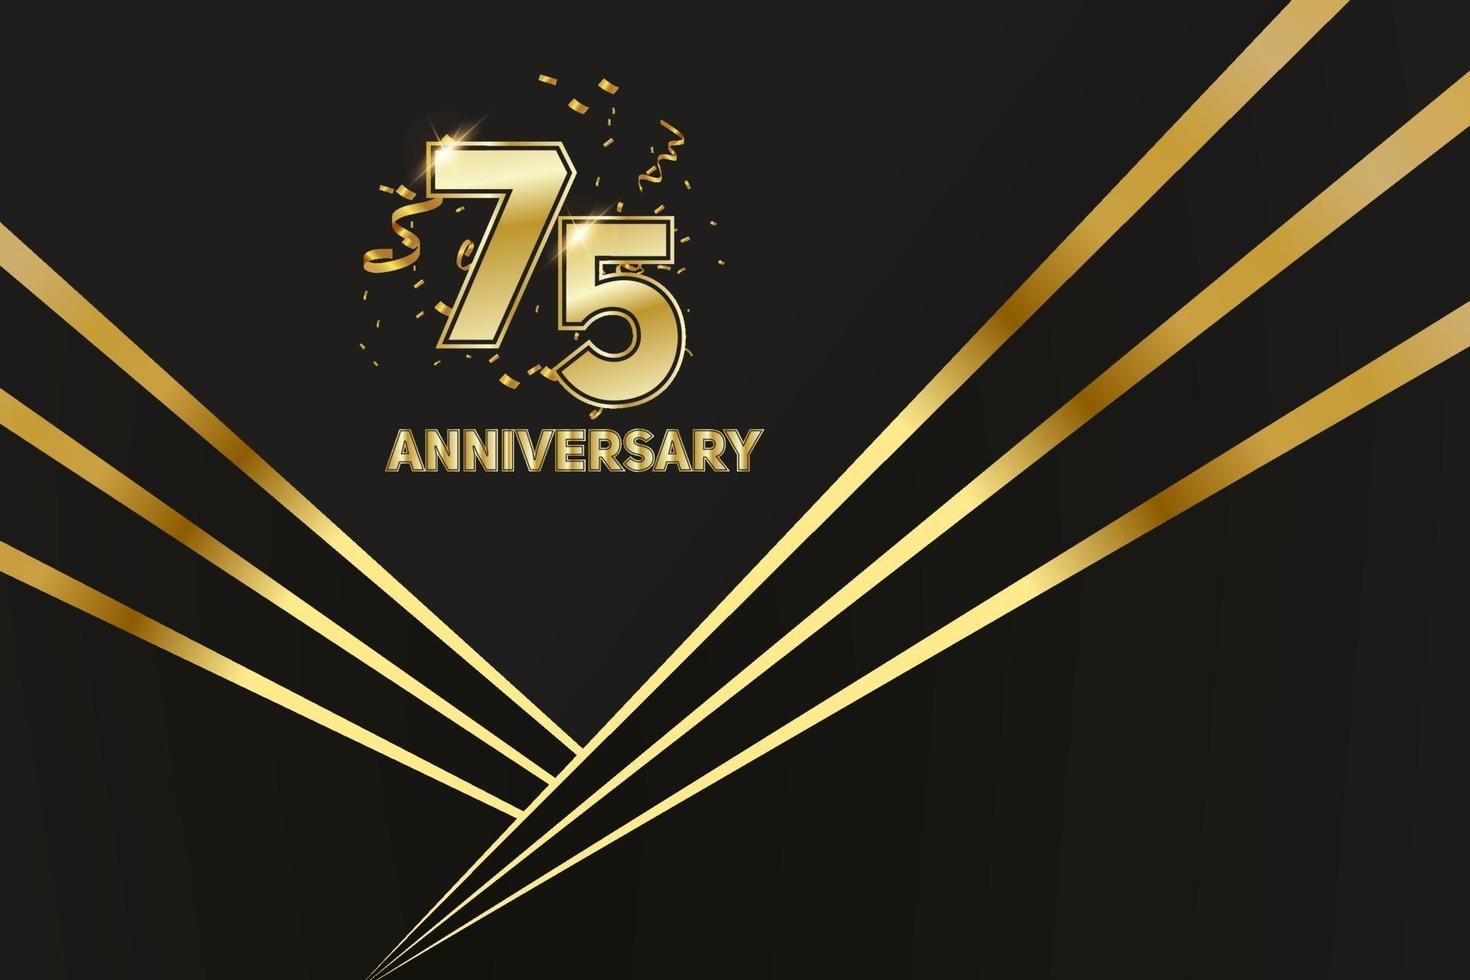 75 year Anniversary celebration. Golden number 75 with sparkling confetti vector